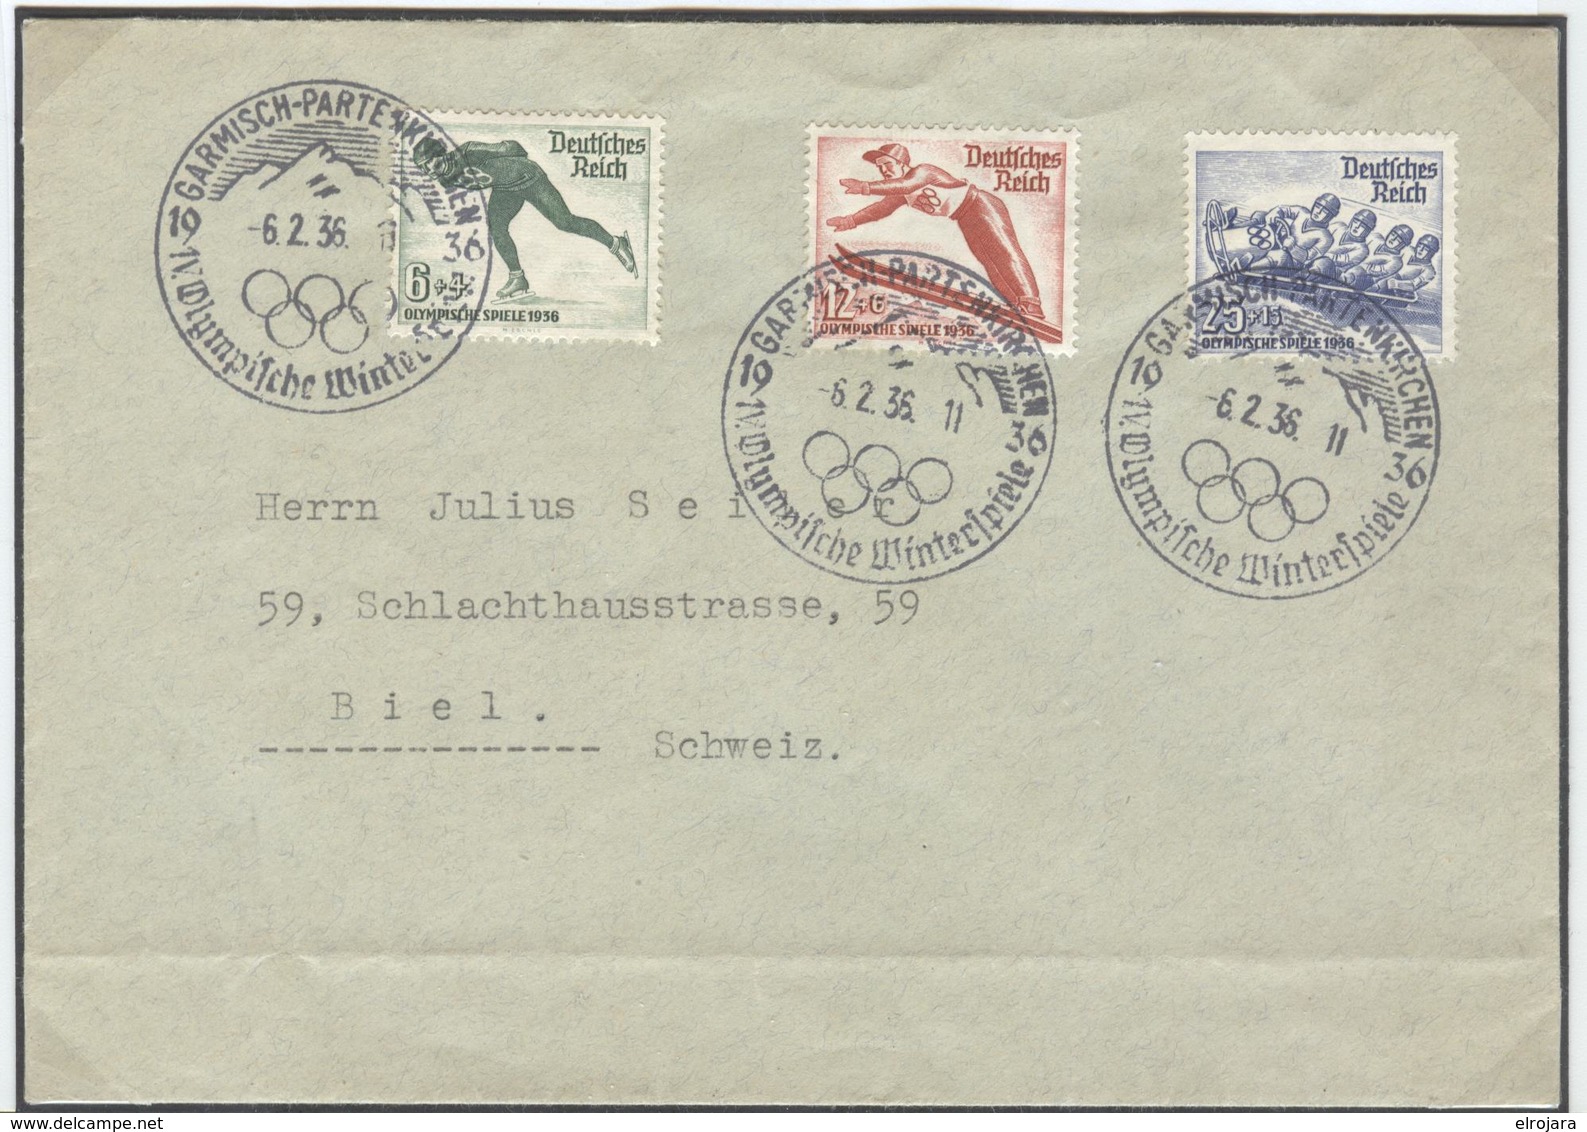 GERMANY Cover With The Complete Set With Olympic Cancel Of The Opening Day 6.2.36 11 - Hiver 1936: Garmisch-Partenkirchen